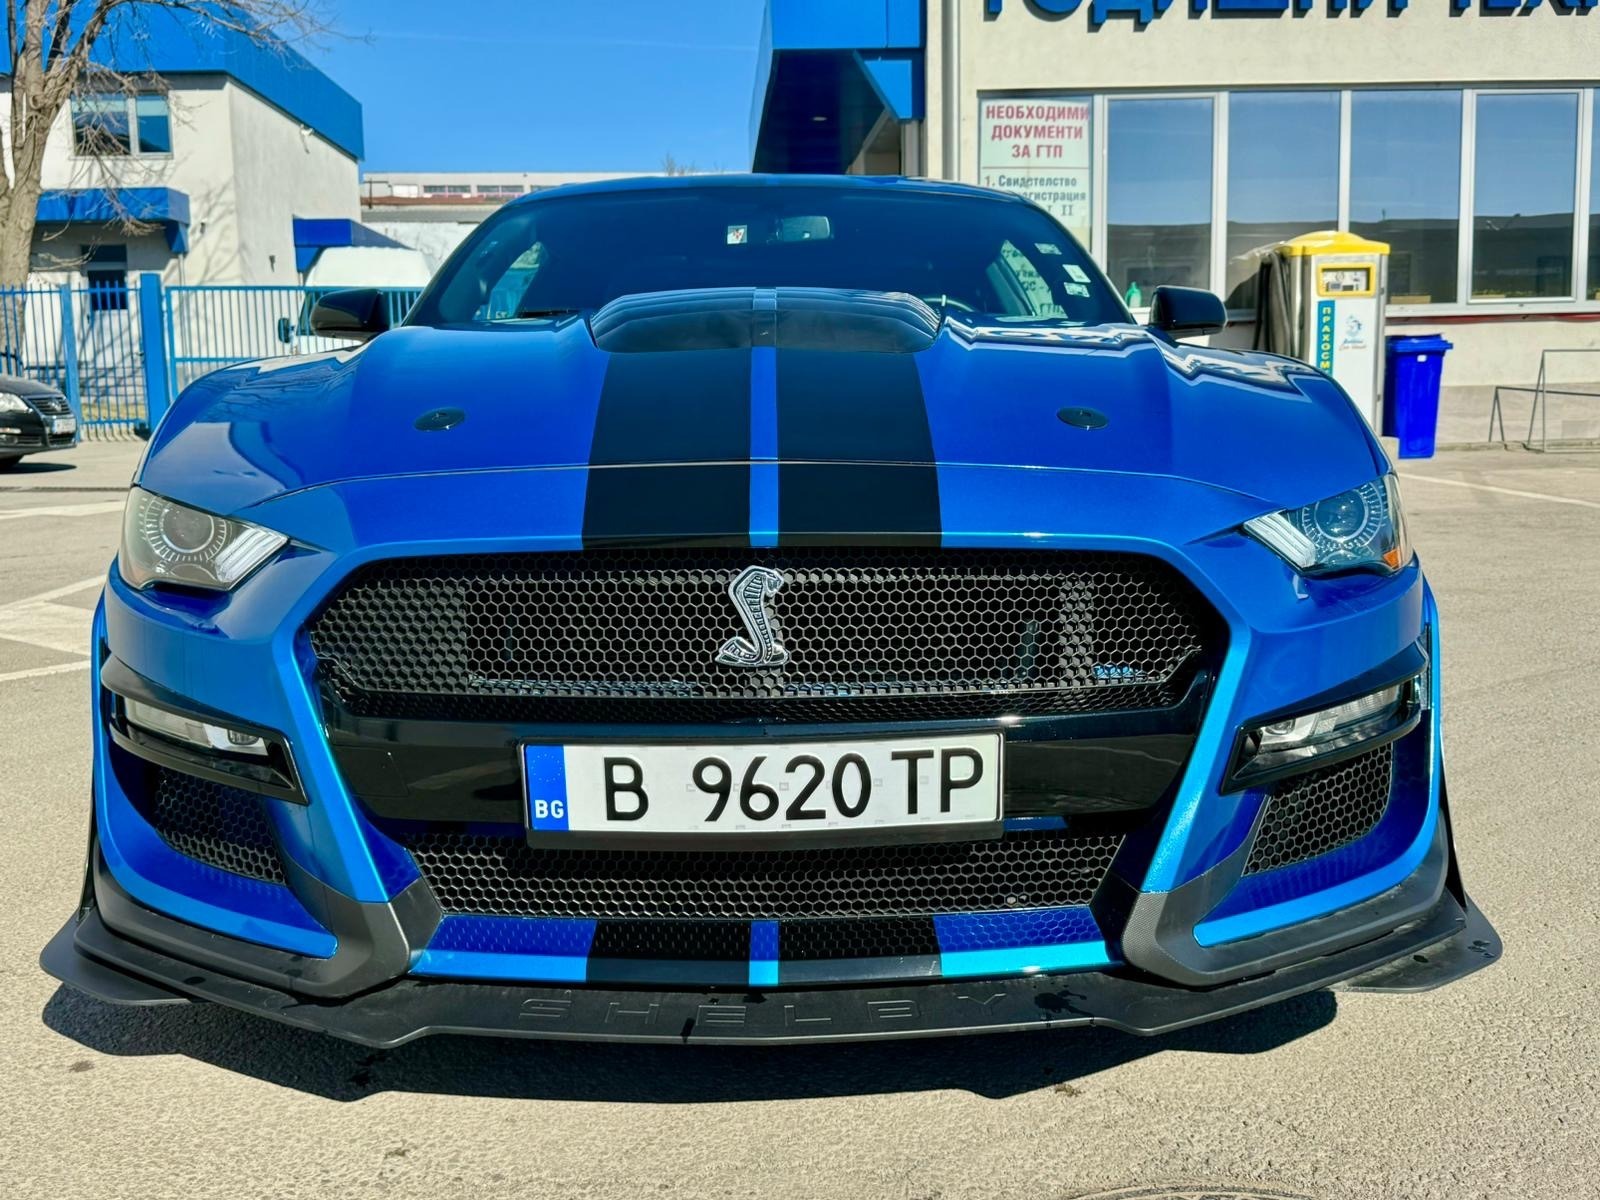 Ford Mustang 5.0 GT SHELBY - изображение 1